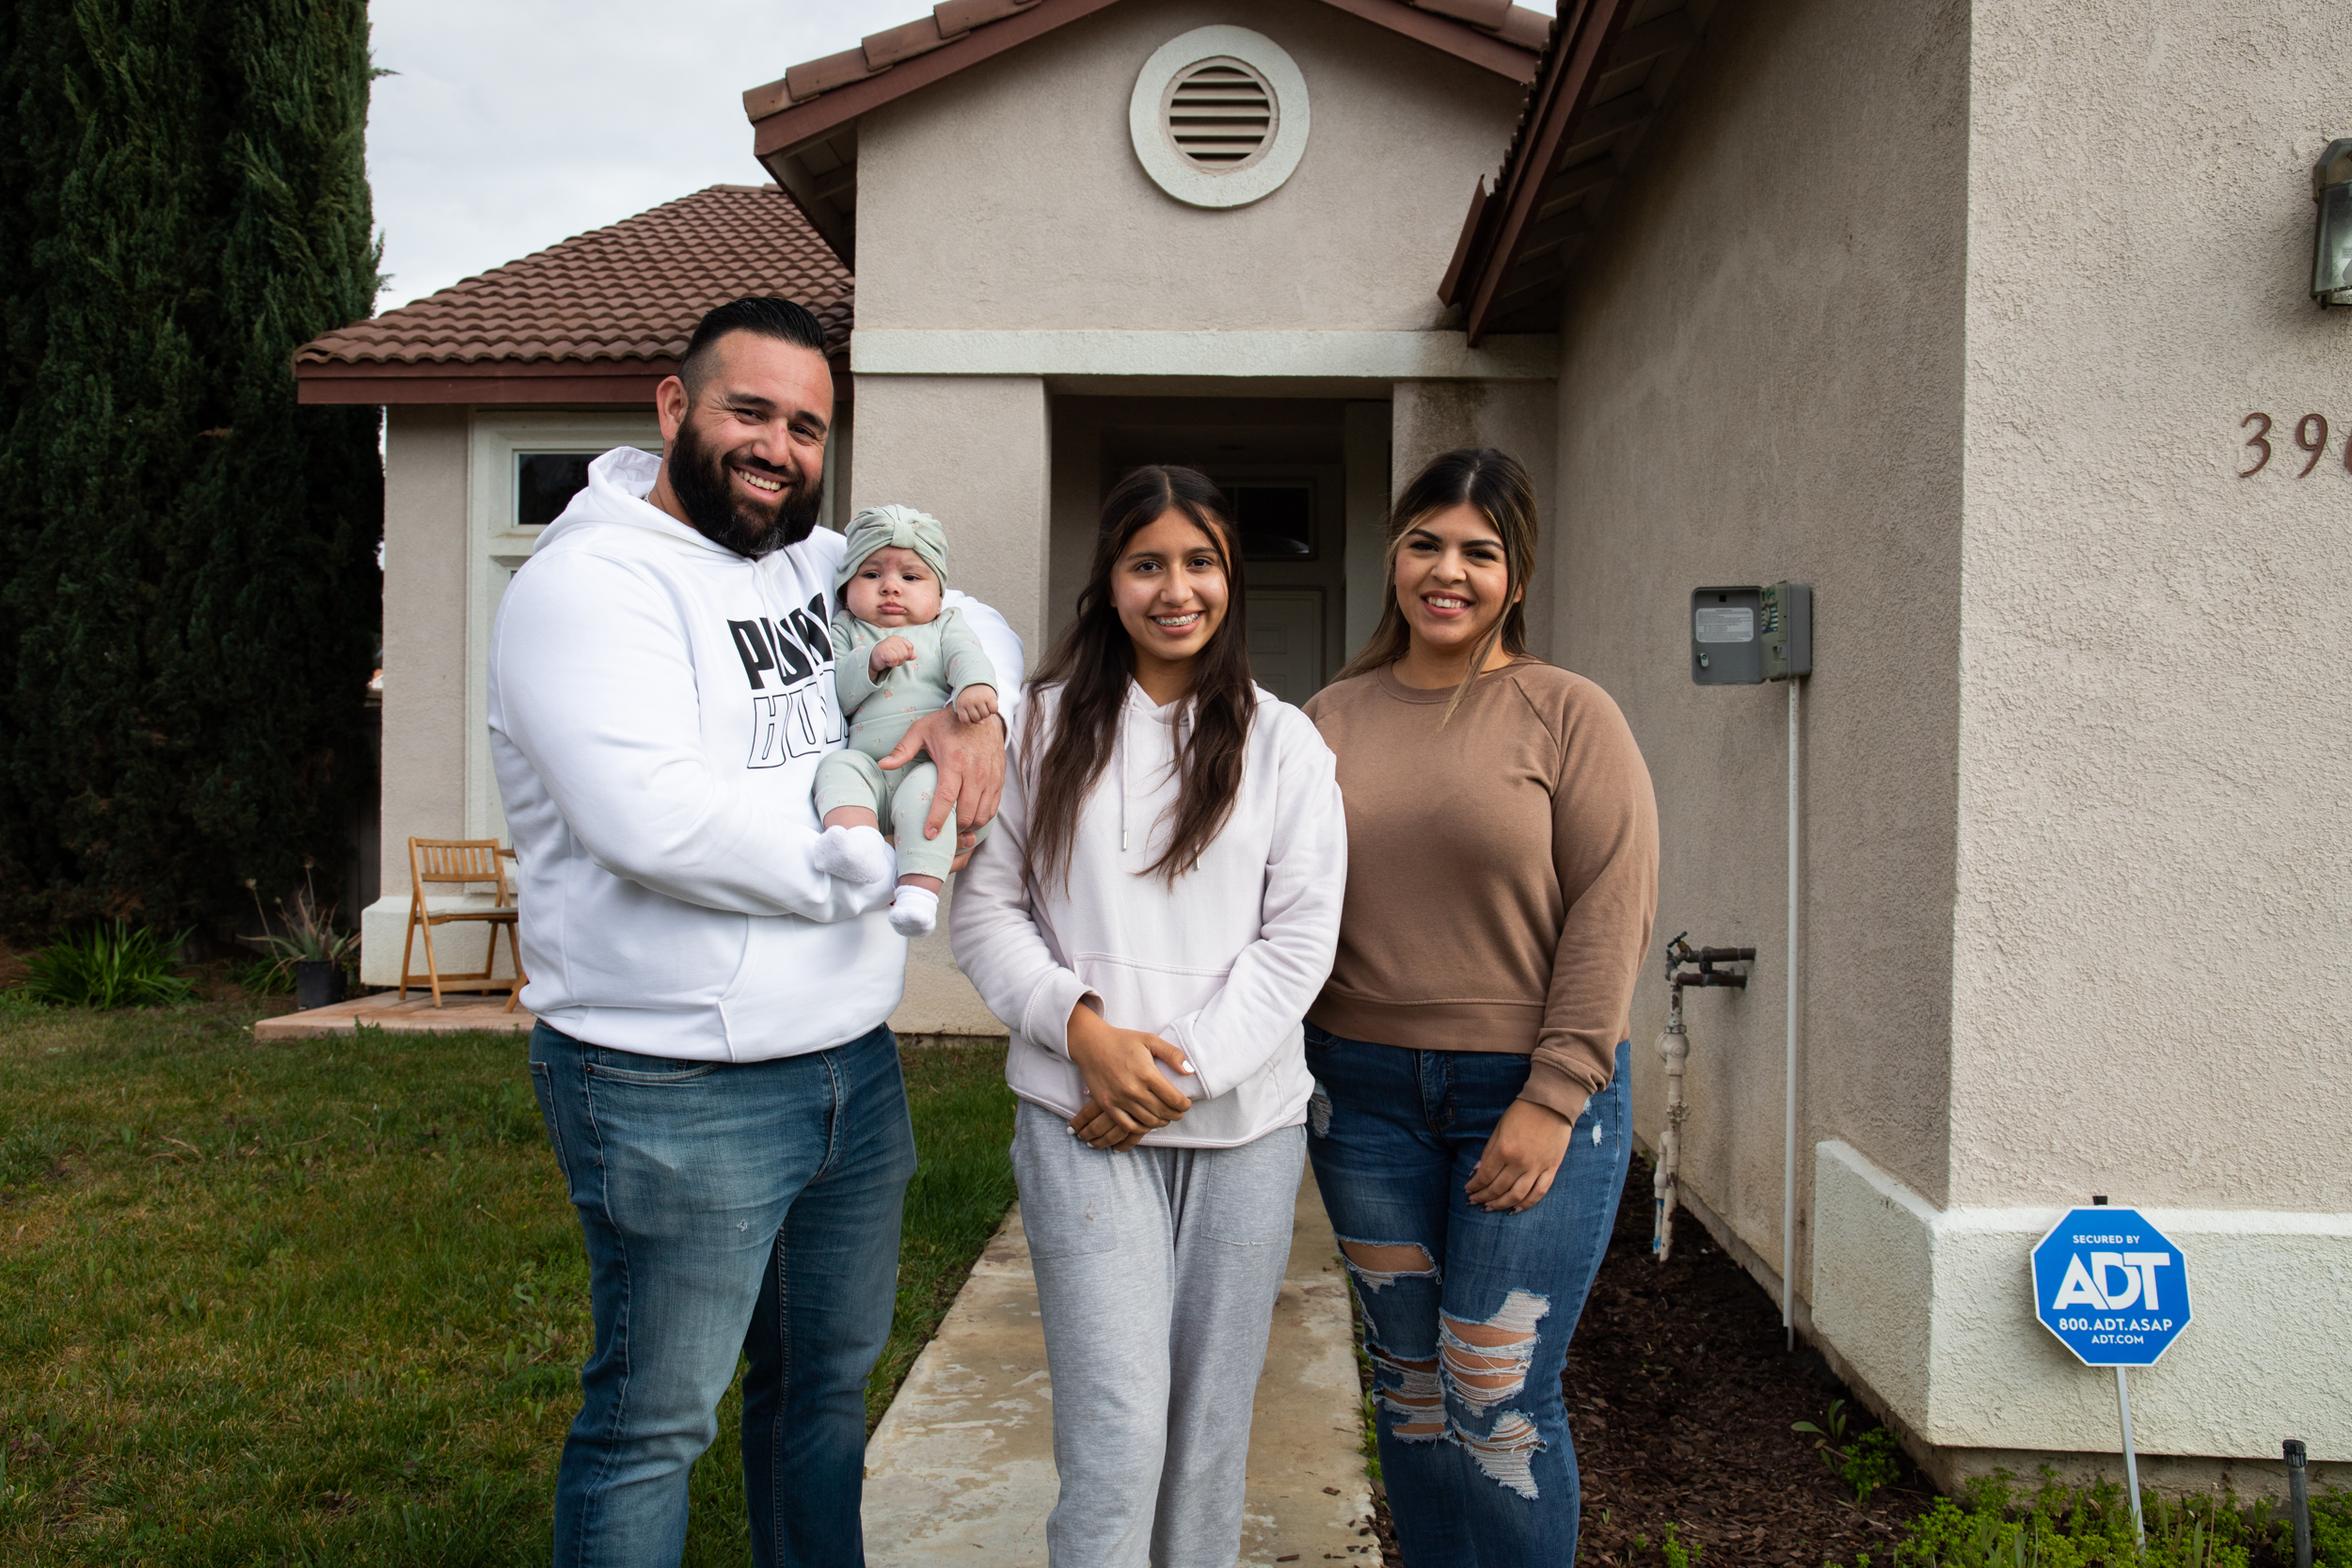 The Lopez-Beltran family moved to the city of Murrieta due to the high cost of living in San Diego. Dohney Castillo (far left) commutes daily to his job at Republic Services in Chula Vista. / Photo by Adriana Heldiz